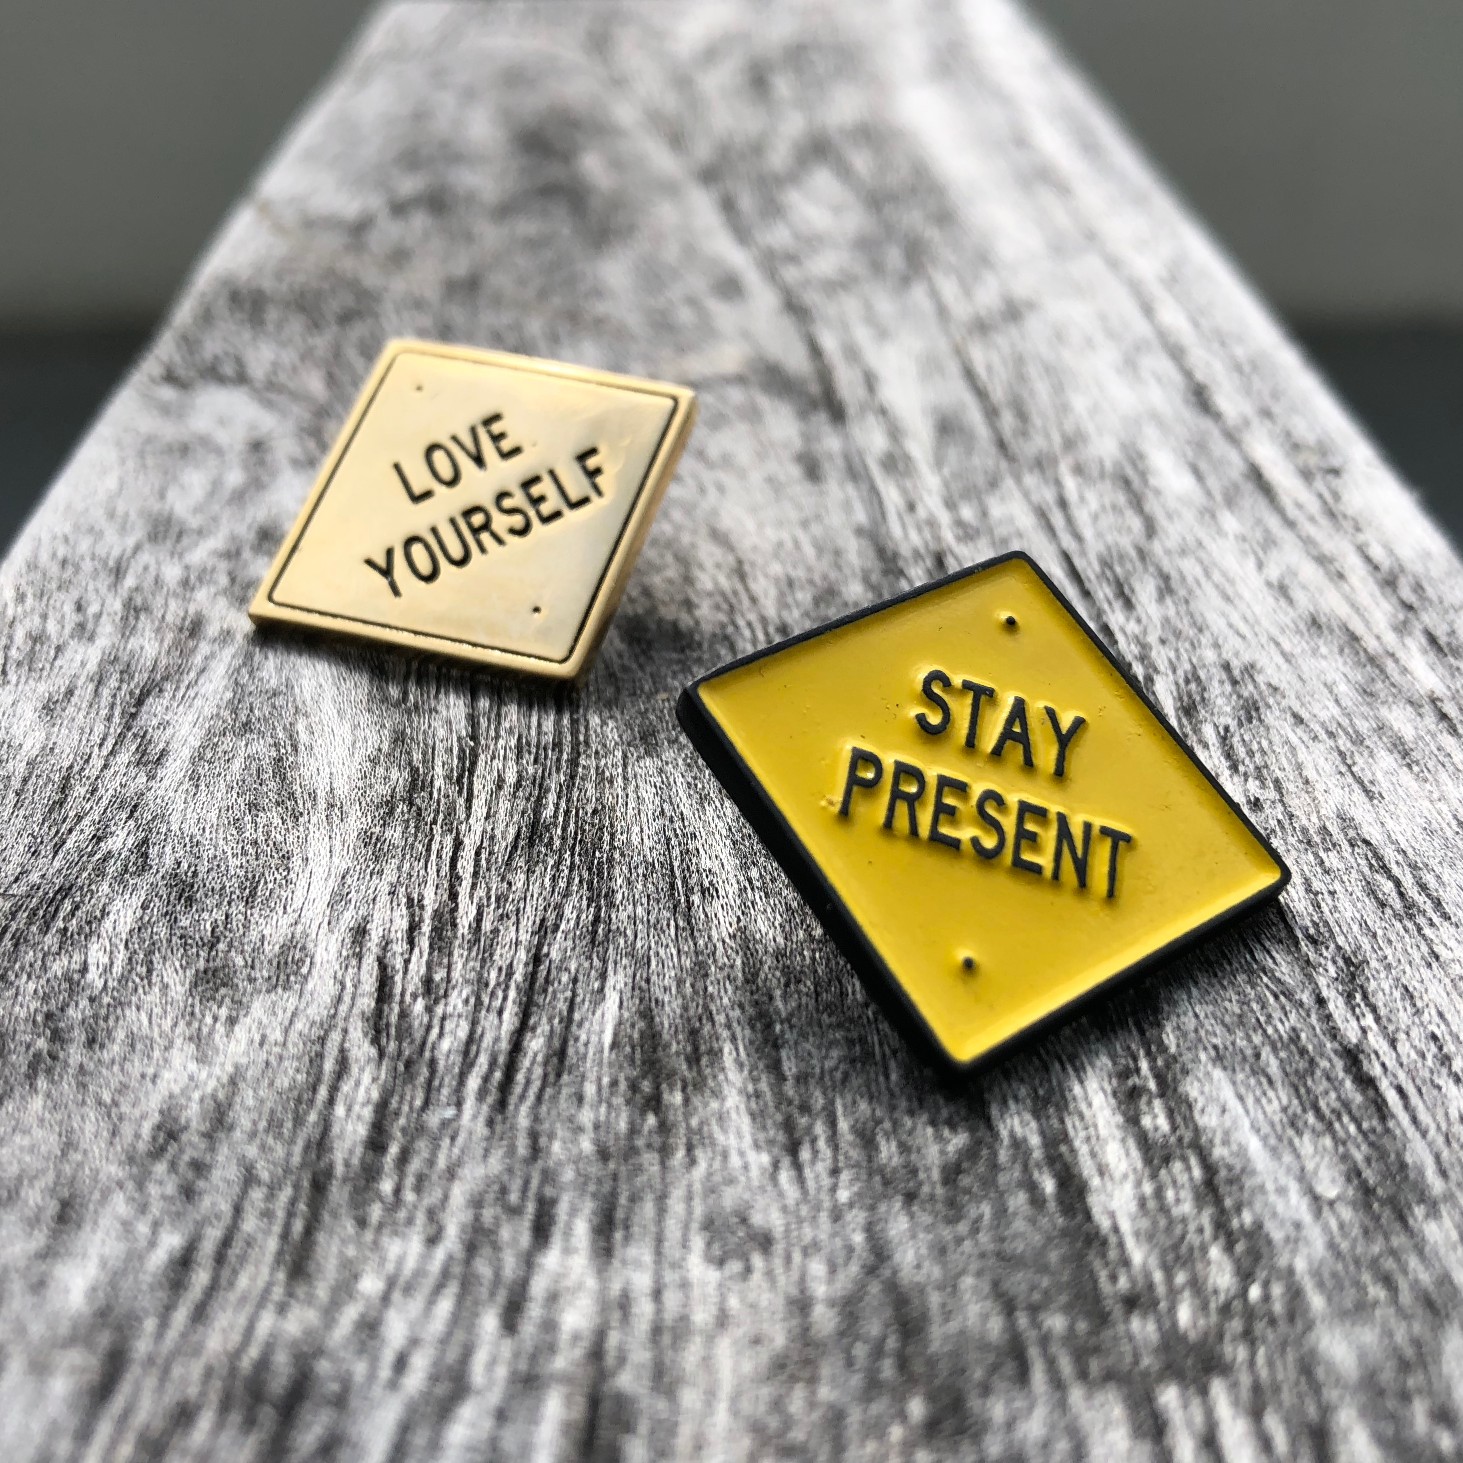 Enamel pins. merch.  stay present. love yourself. 4_LOW RES.jpg